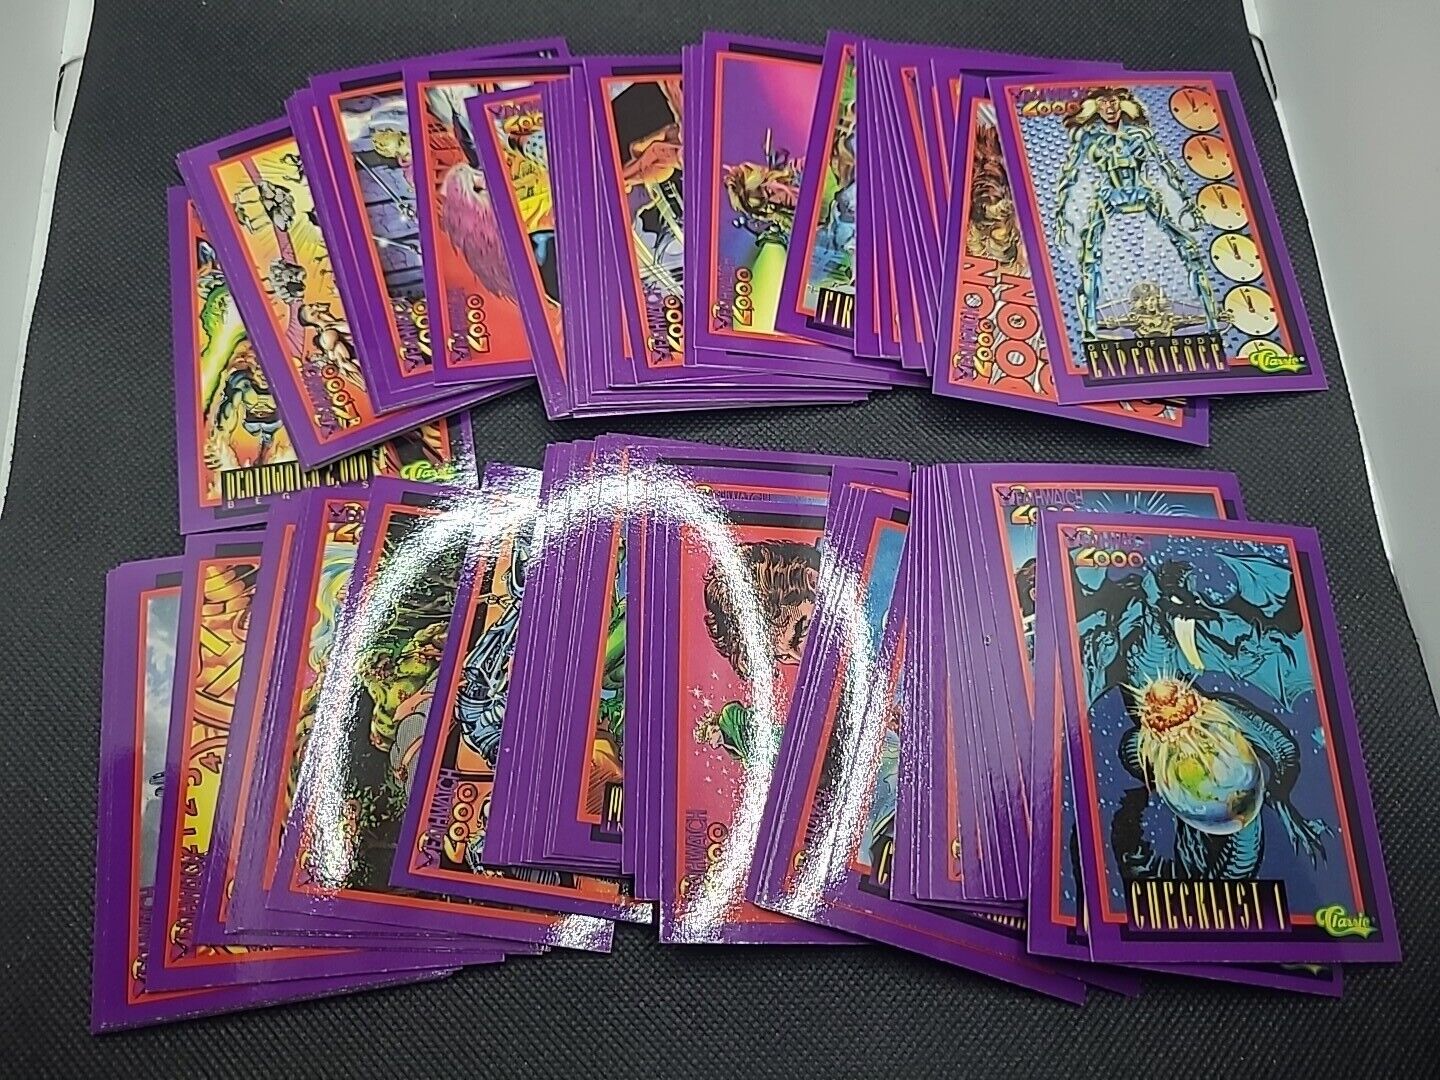 1993 Classic Games Deathwatch 2000 Begins Complete Set Trading Cards #1-100